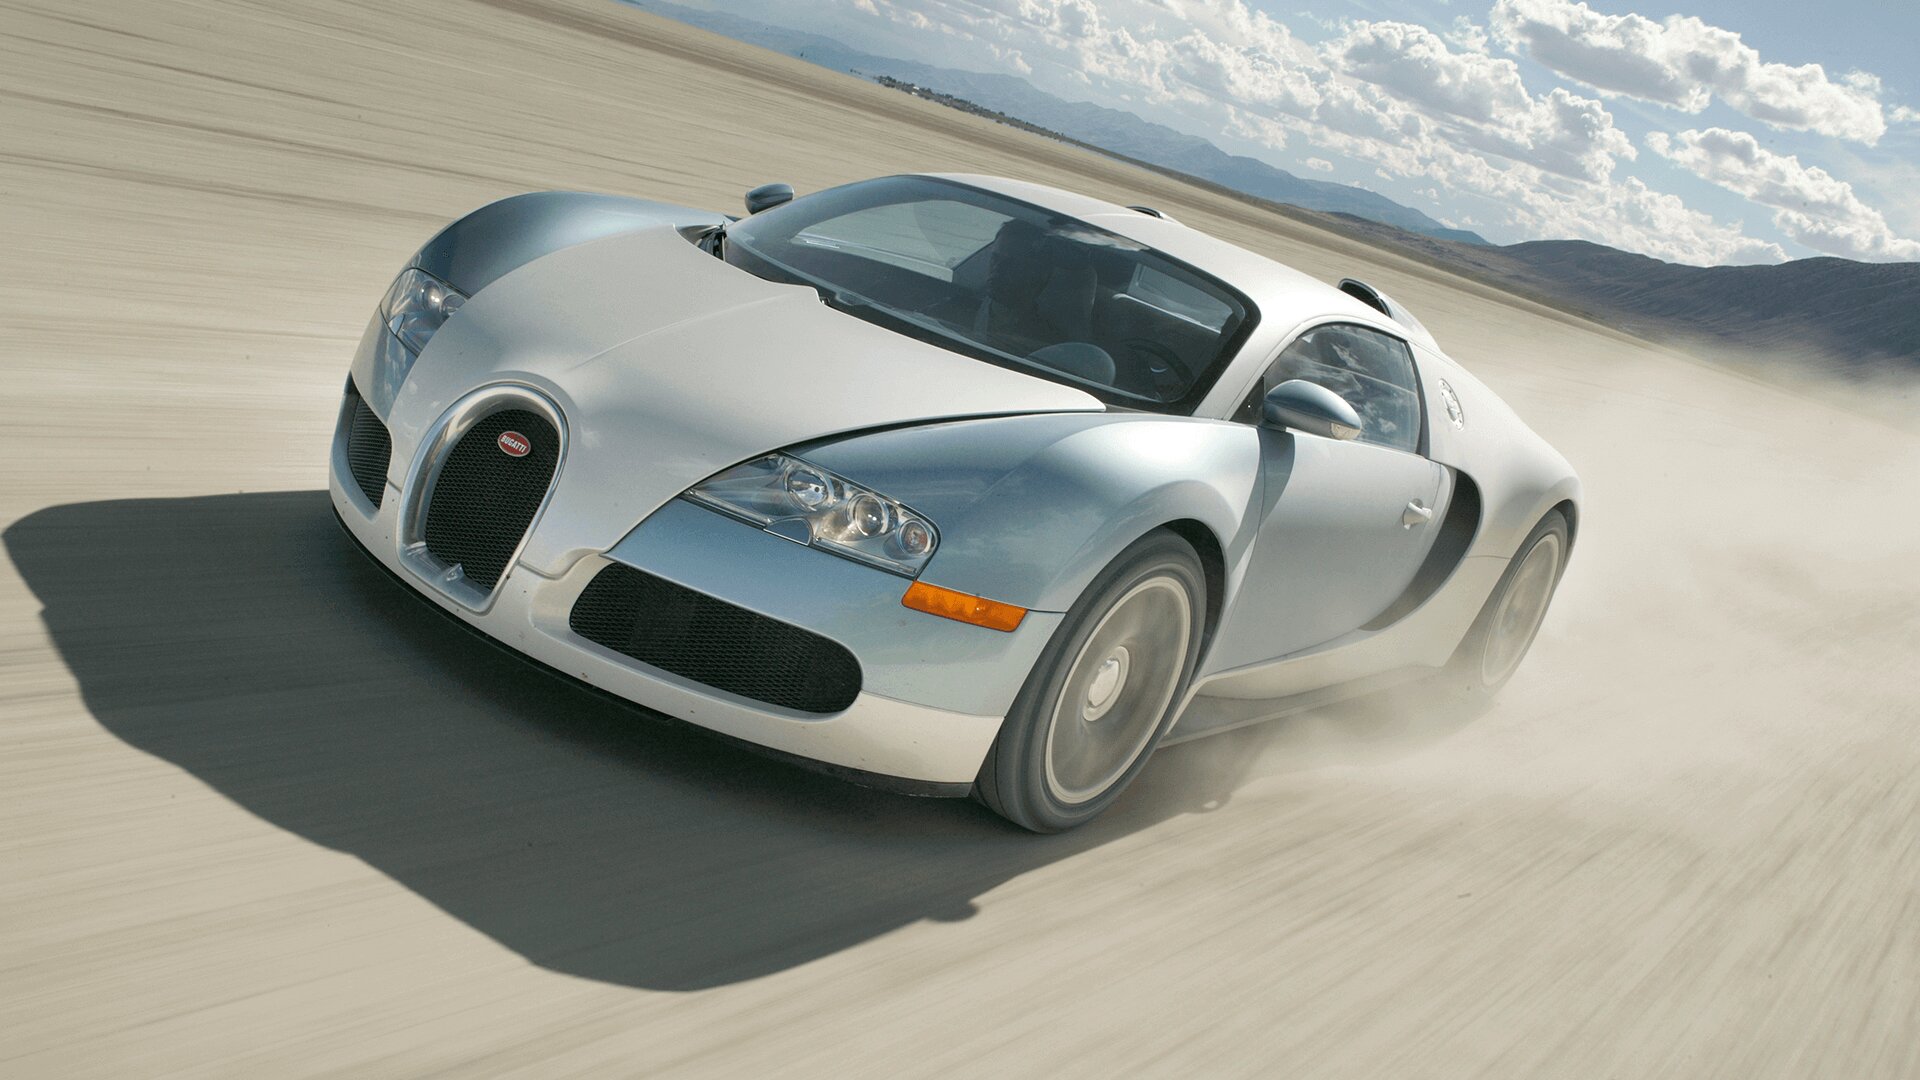 You are currently viewing Automat’s Bugatti EB 16.4 Veyron (Chassis No. 001)